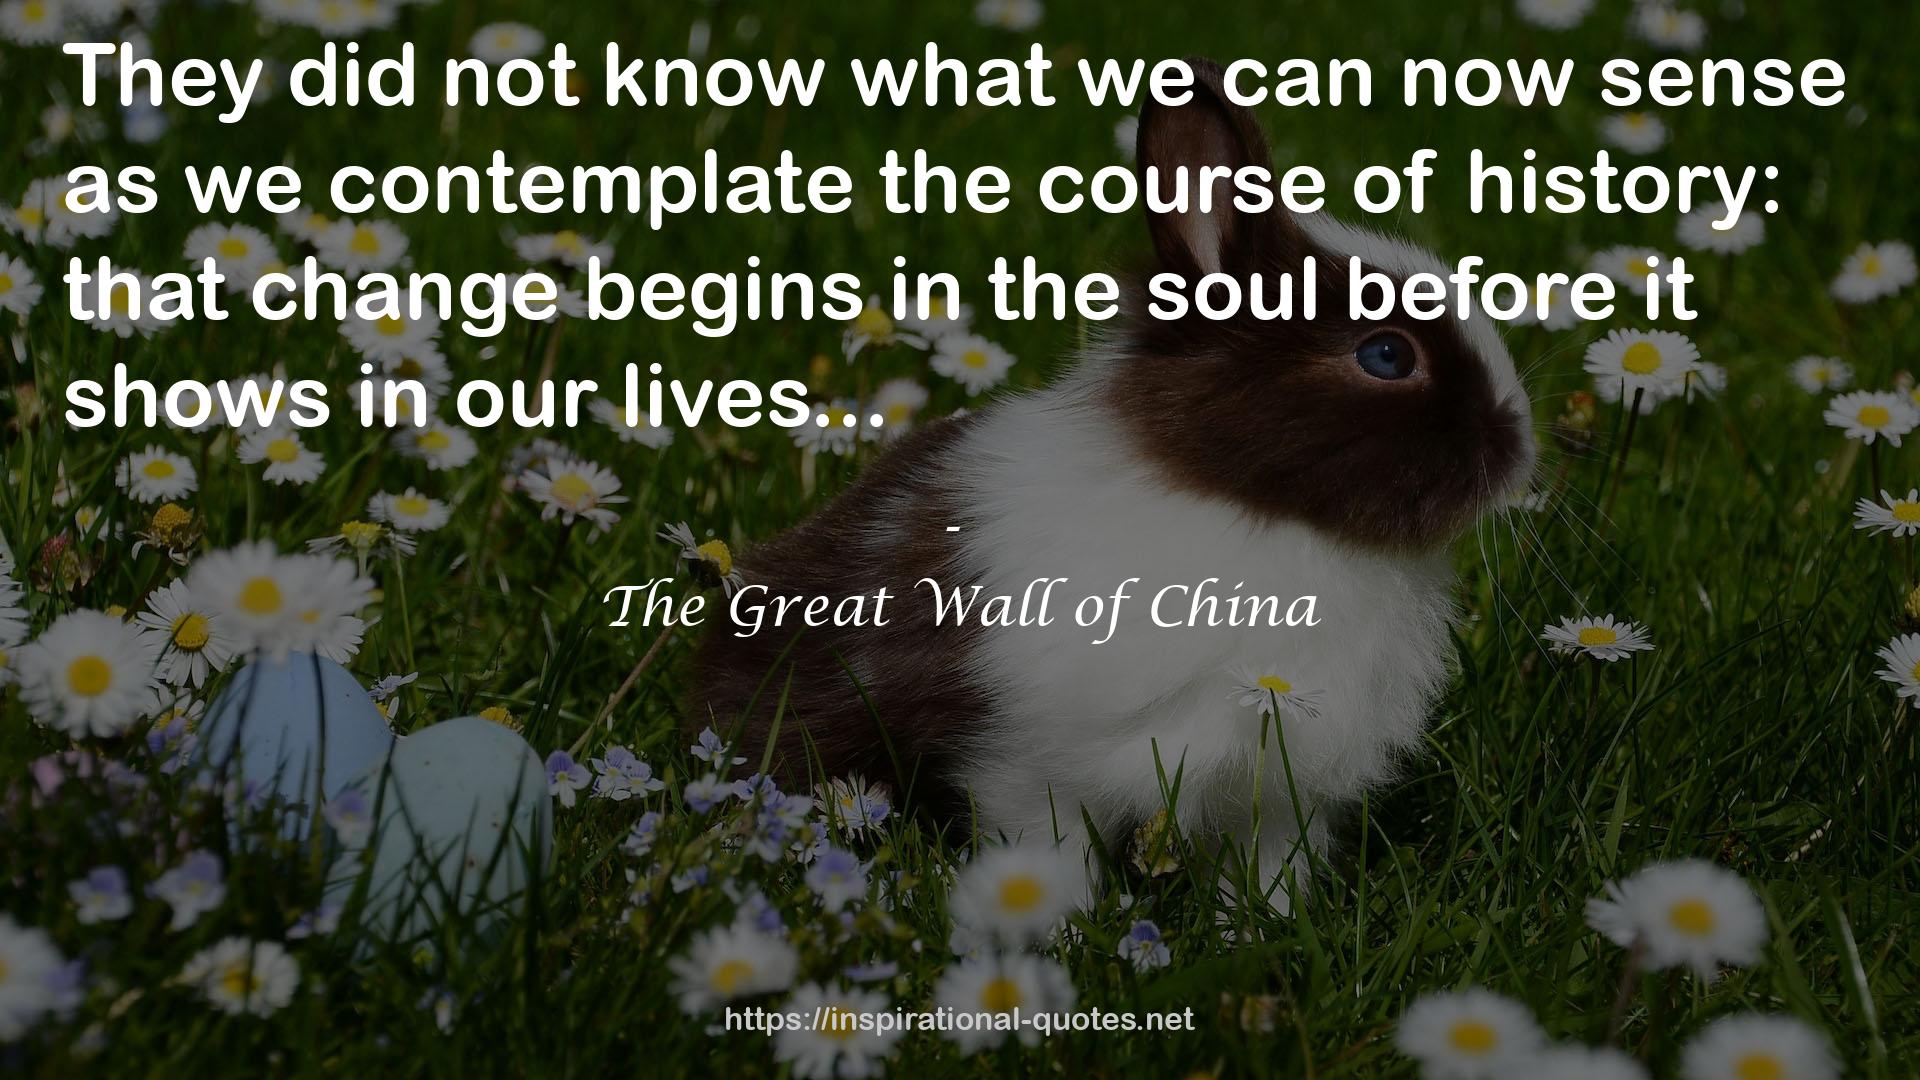 The Great Wall of China QUOTES